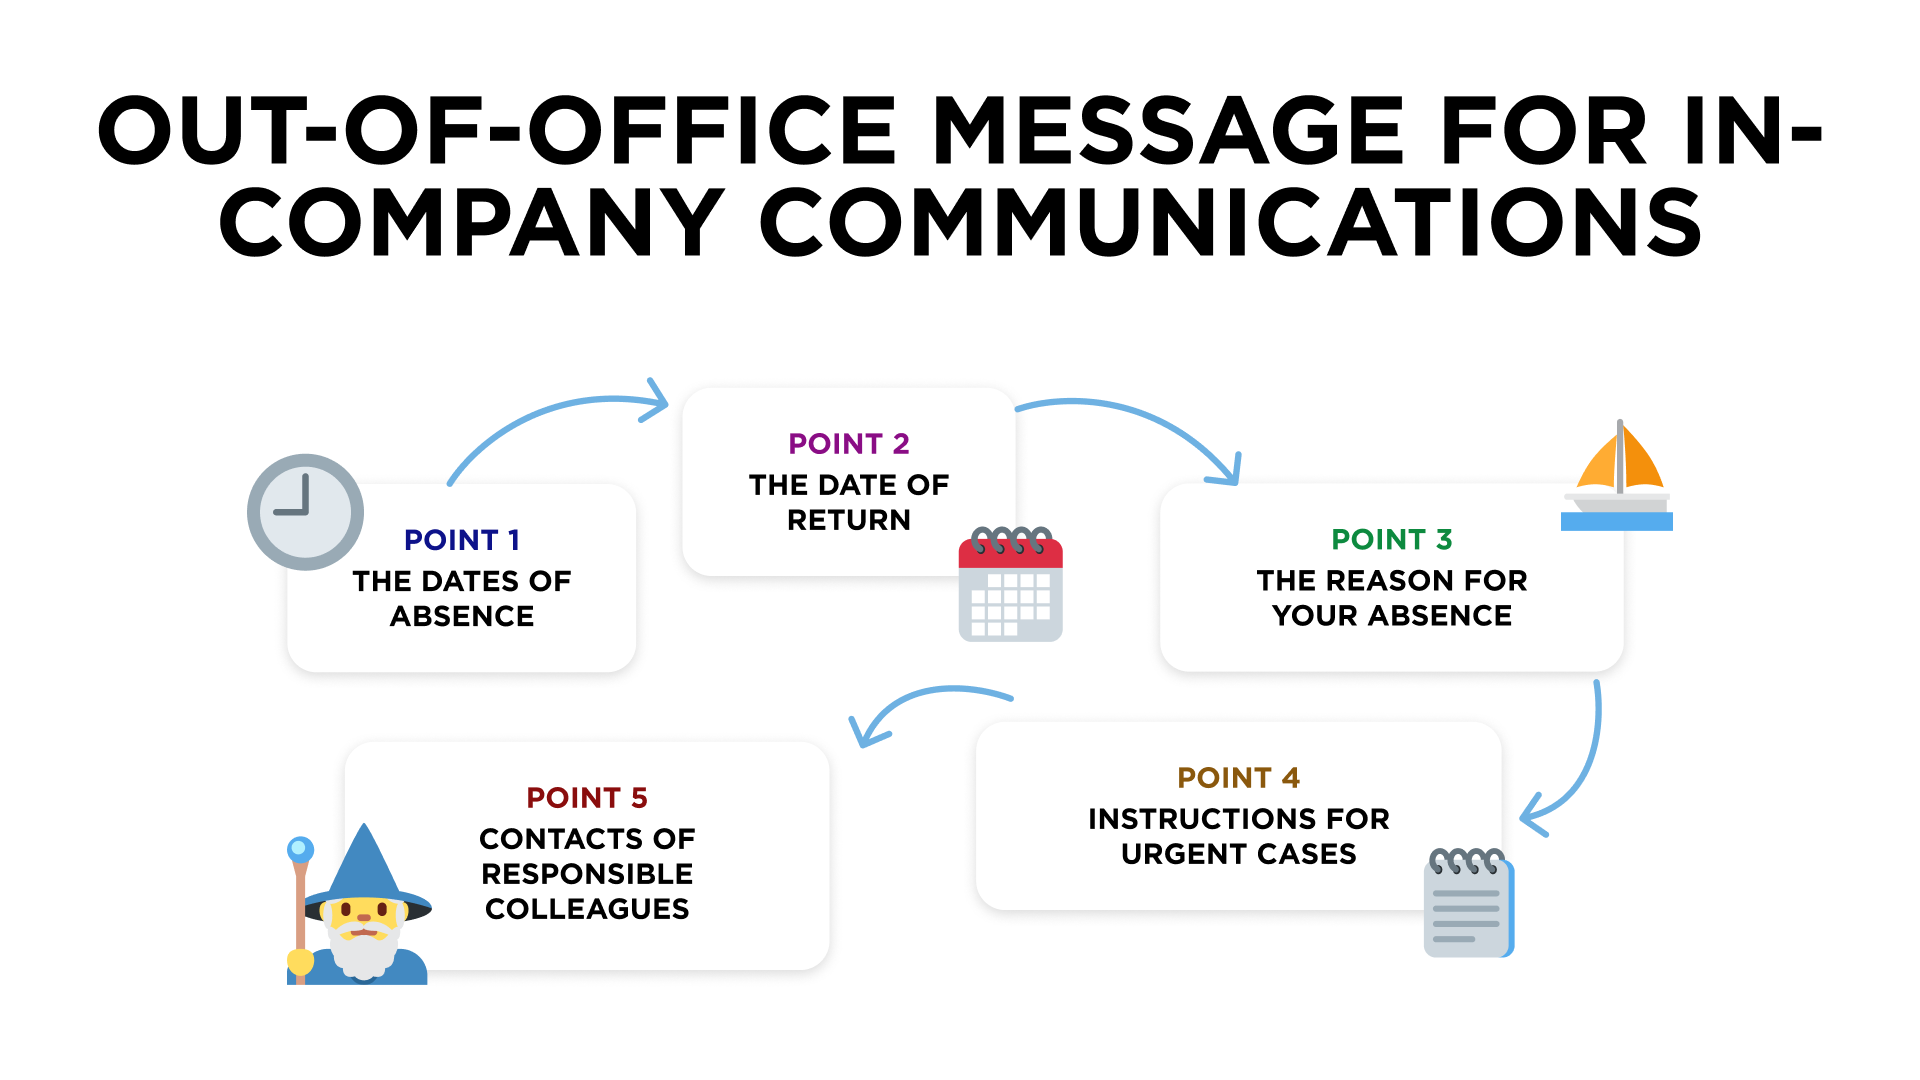 Out-of-office message for in-company communication